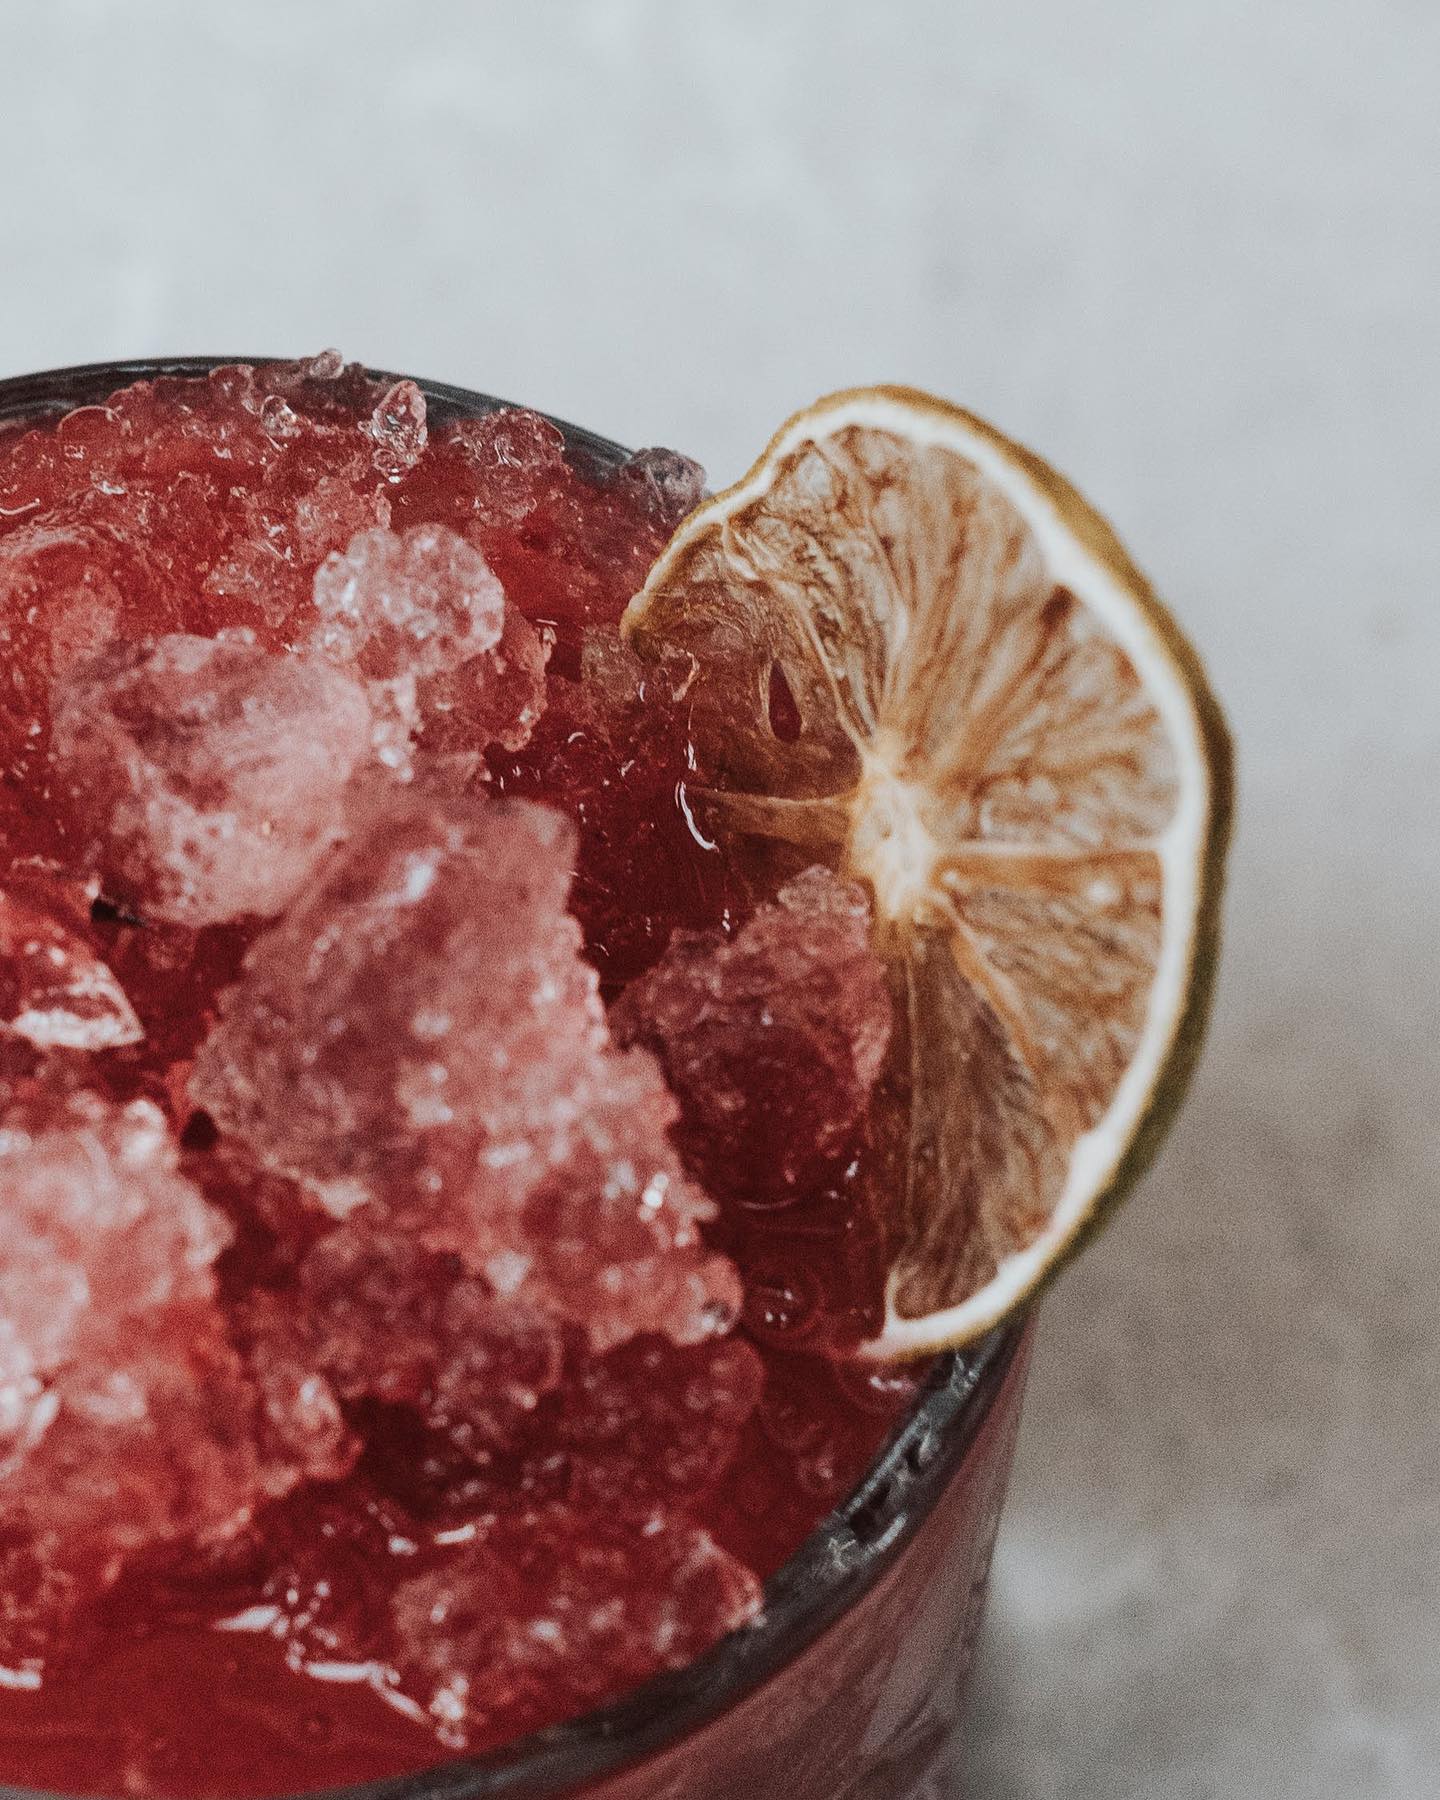 A drink with a dried up lemon and ice to describe Beauty in Photography